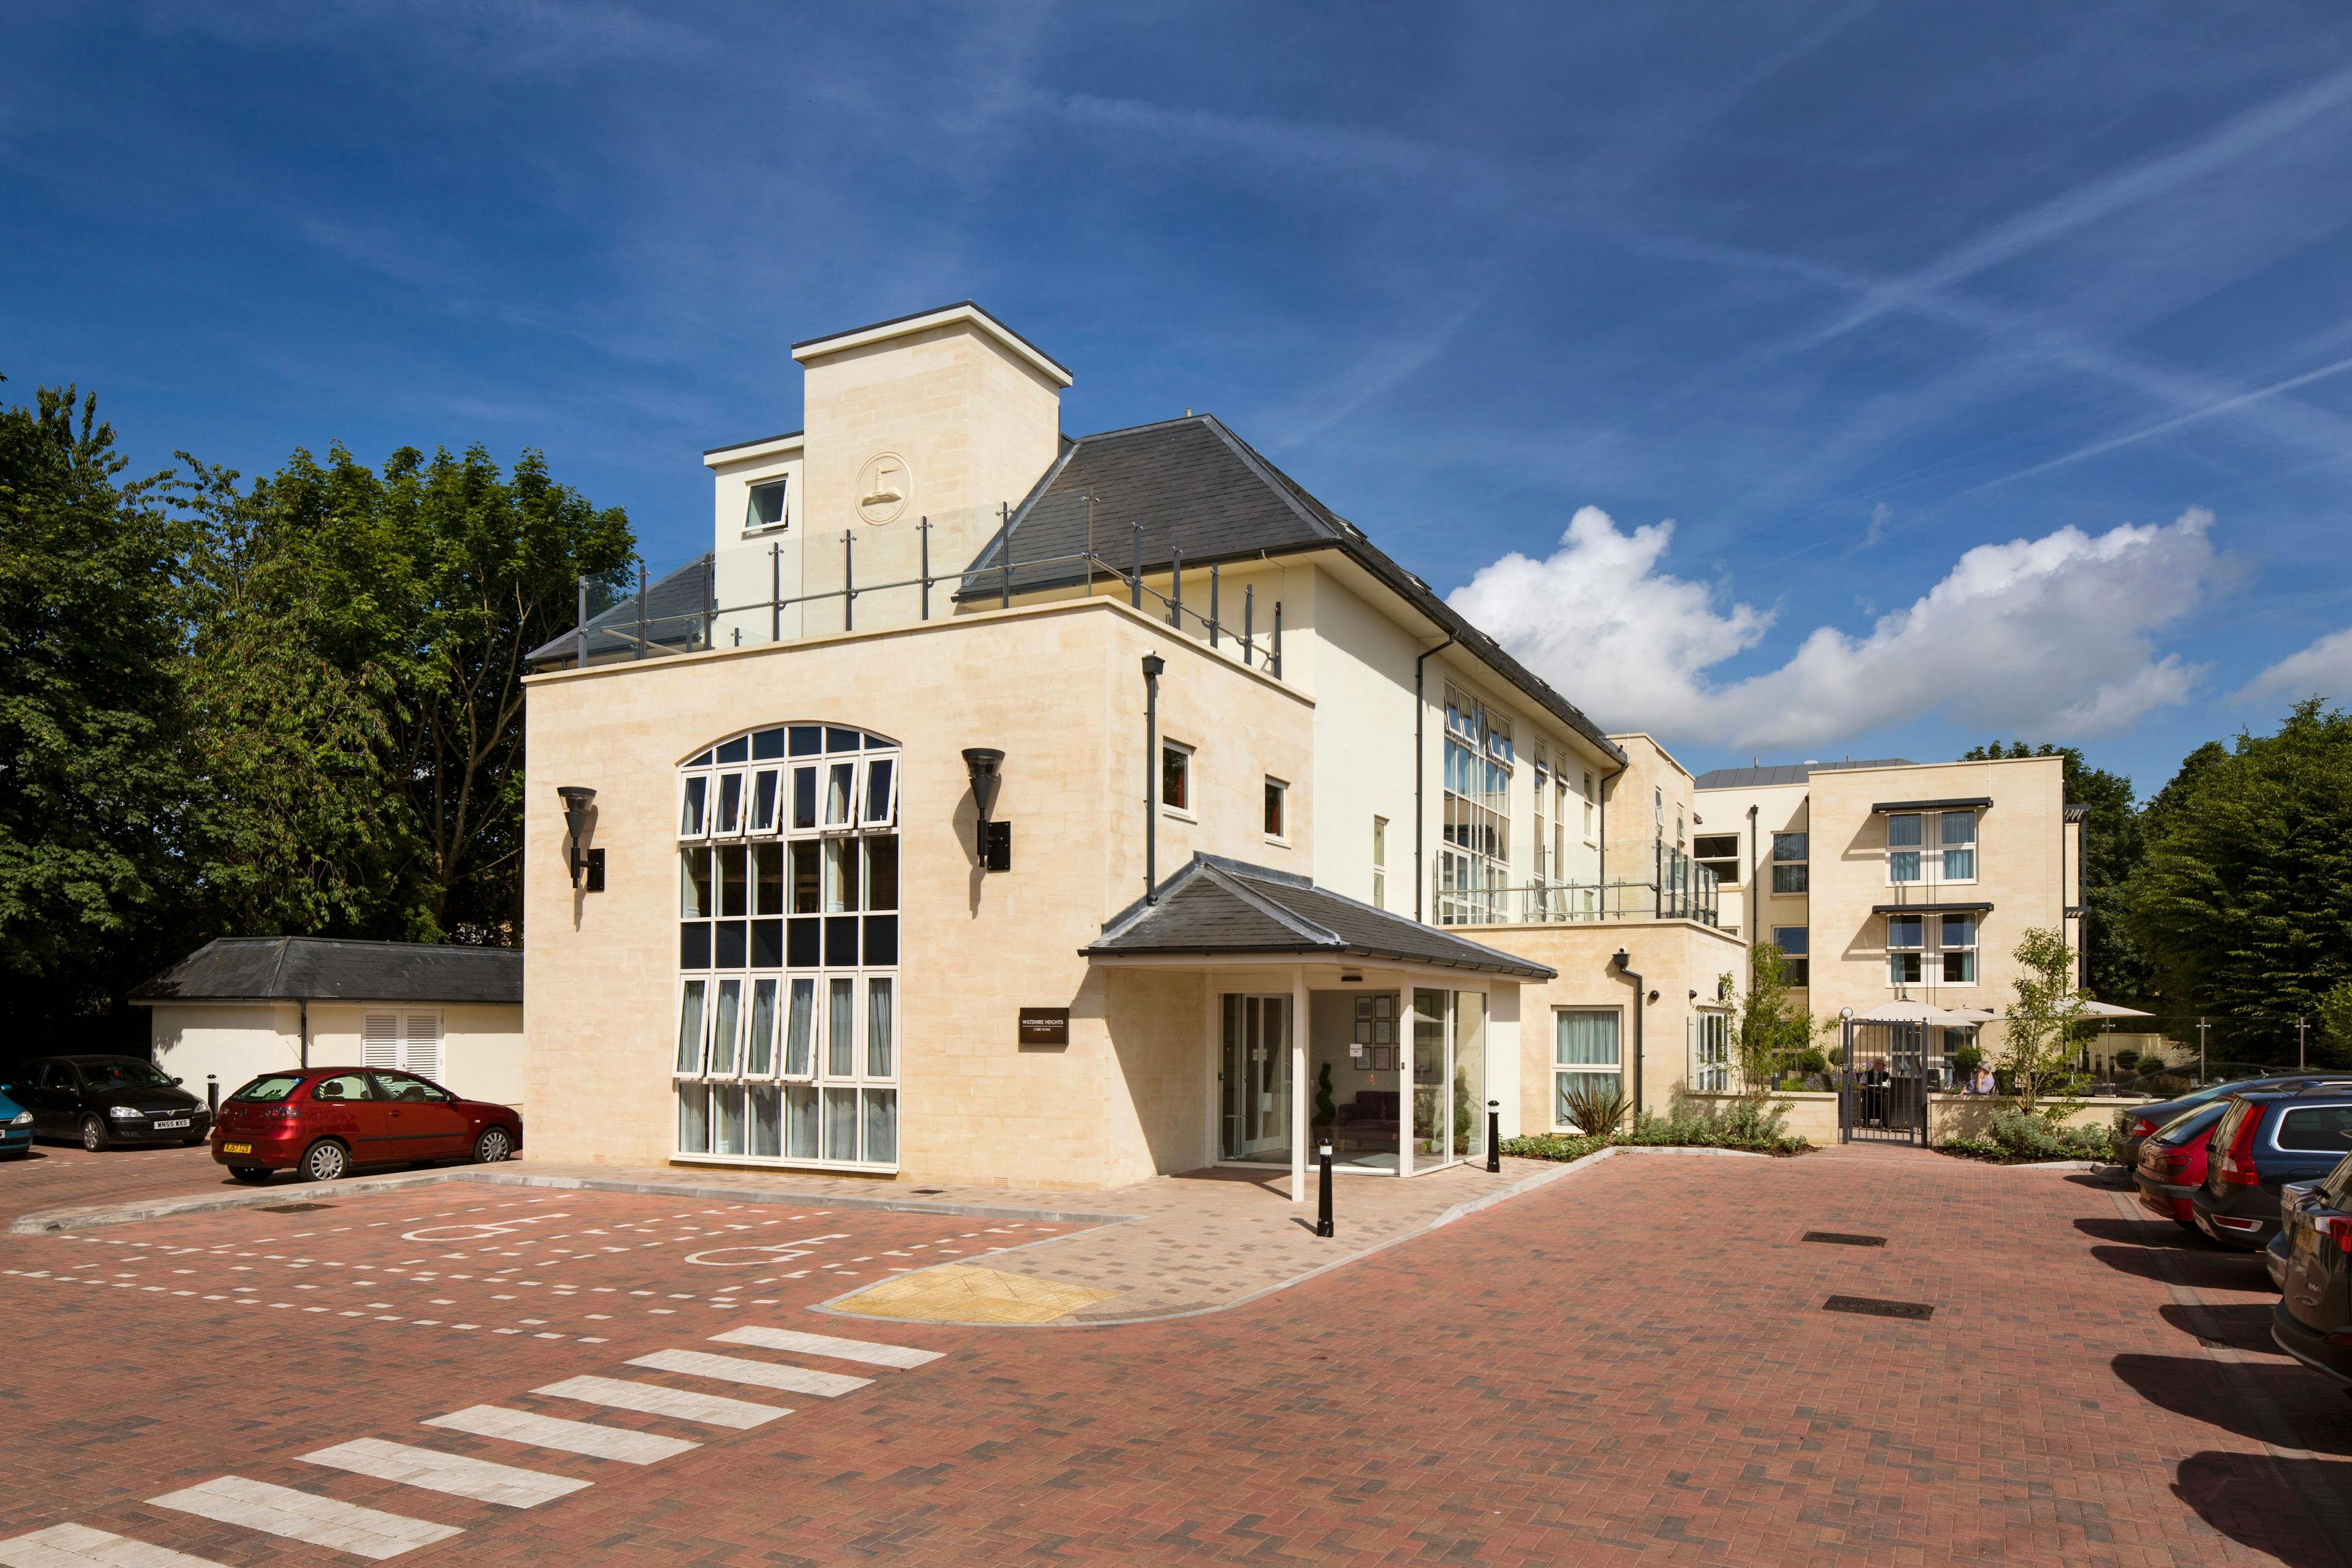 Exterior of Wiltshire Heights Care Home in Bradford-on-Avon, Wiltshire